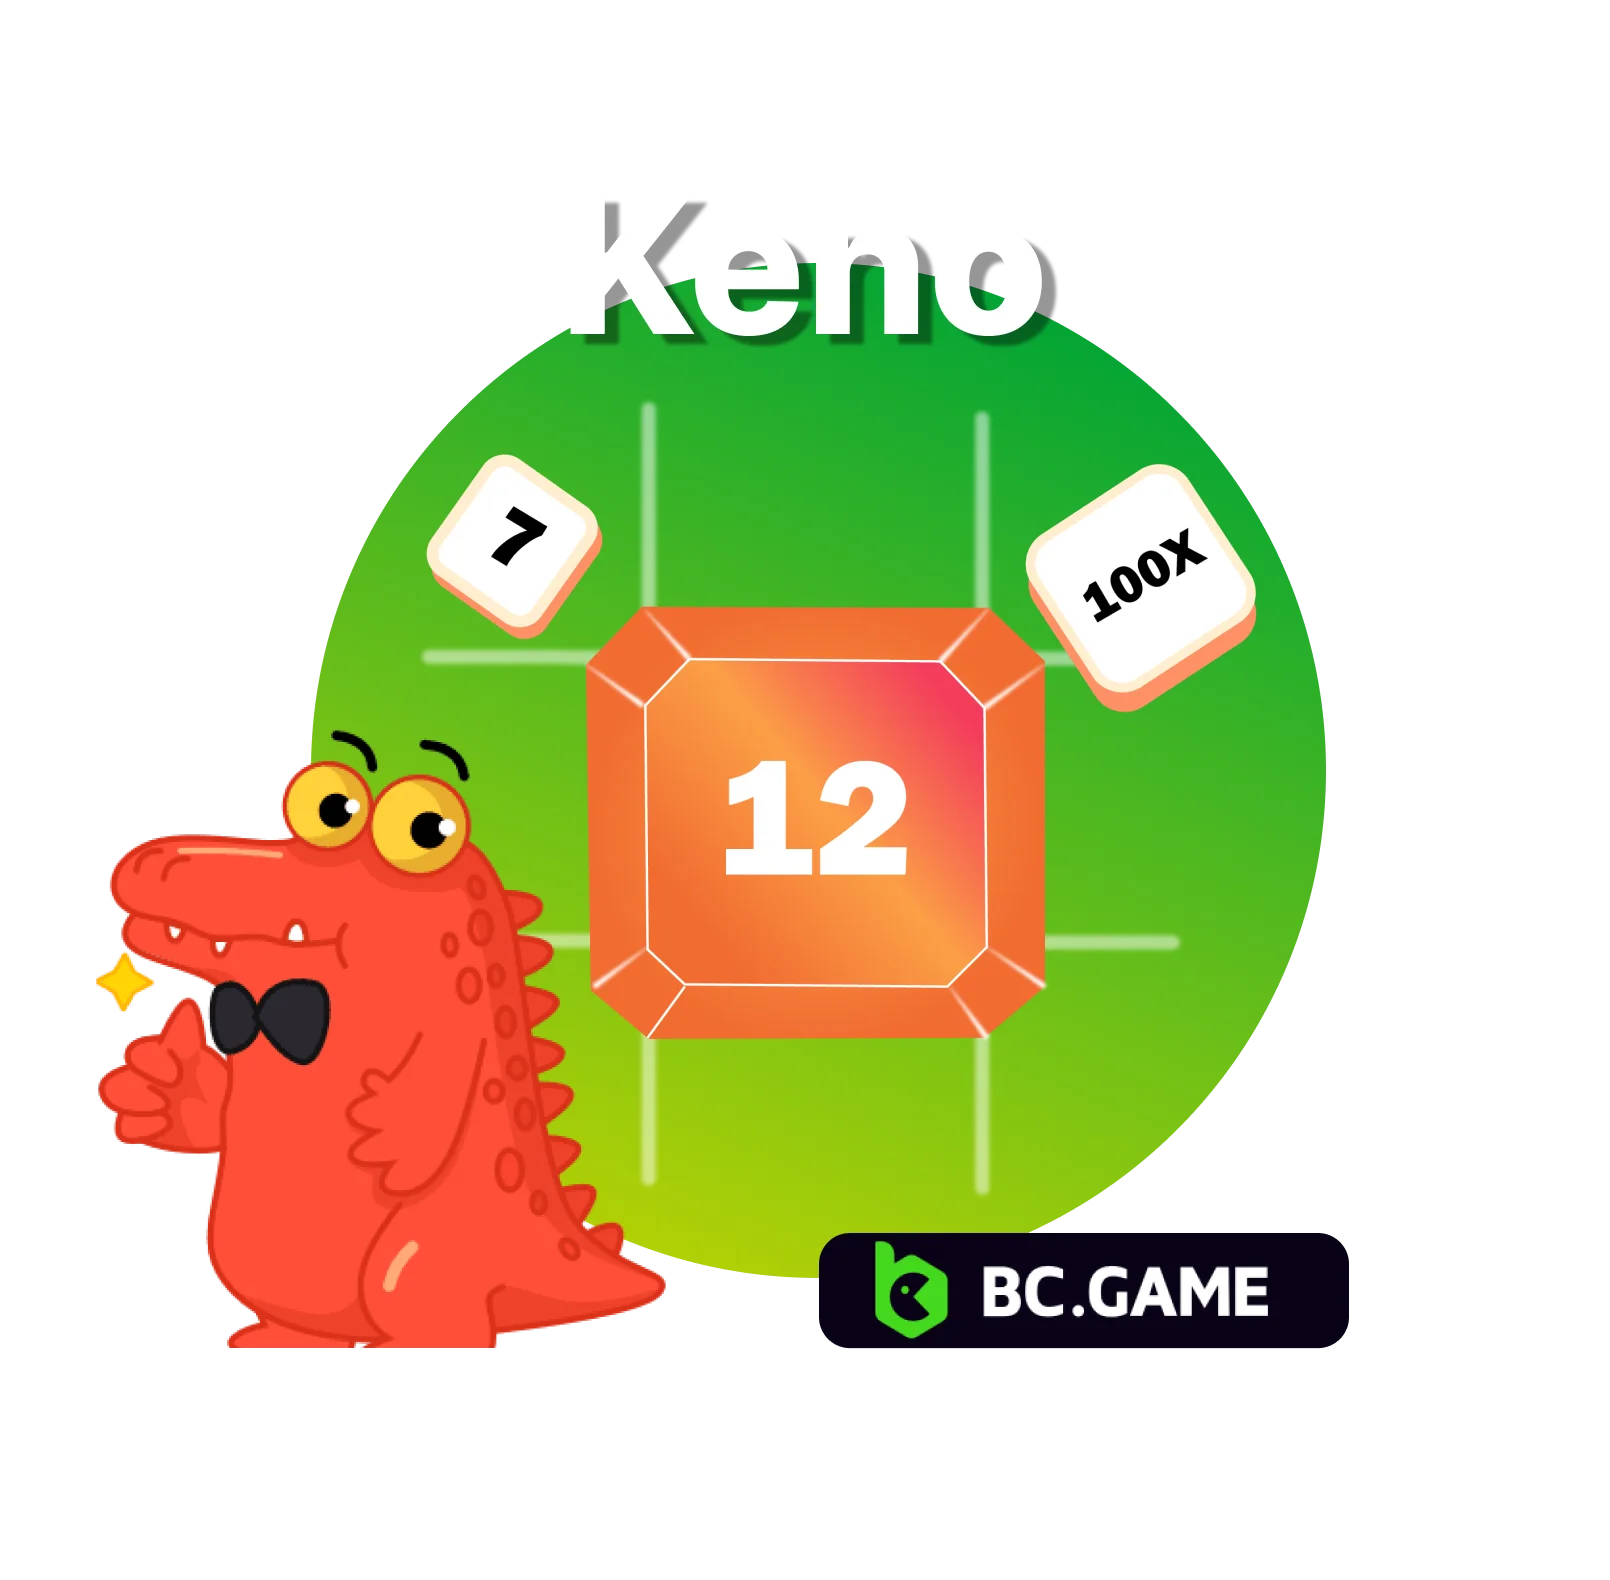 Explore Keno game and its main features on BC.Game.